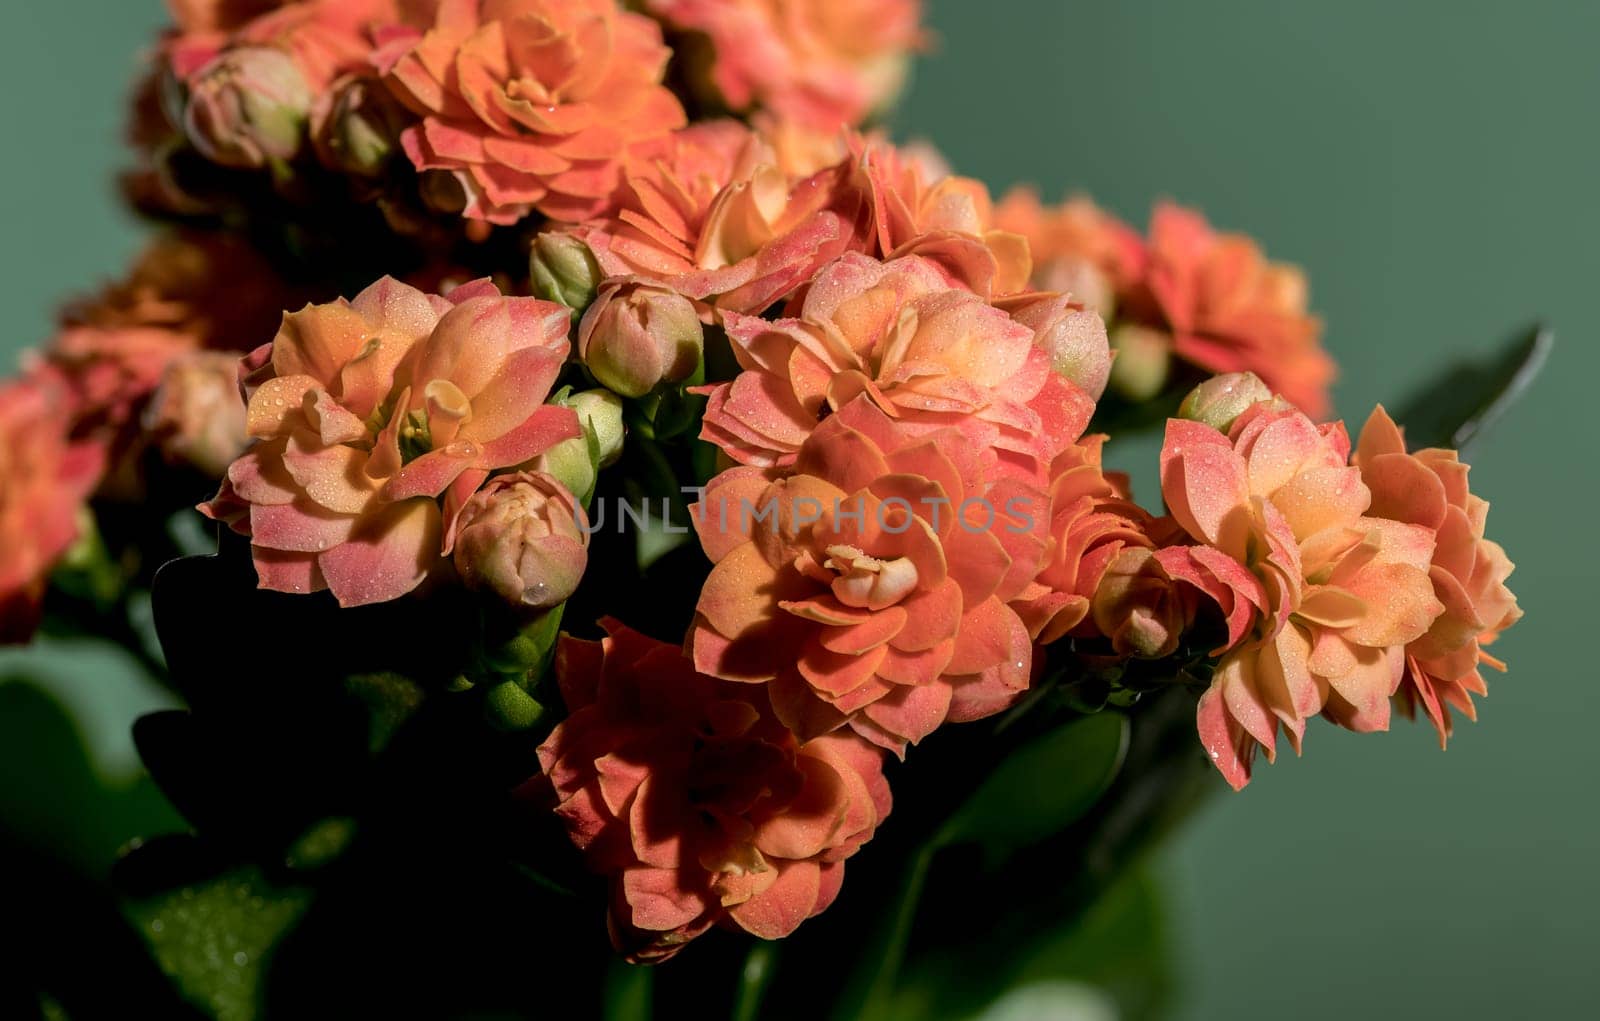 Beautiful blooming Orange kalanchoe flowers on a green background. Flower heads close-up.